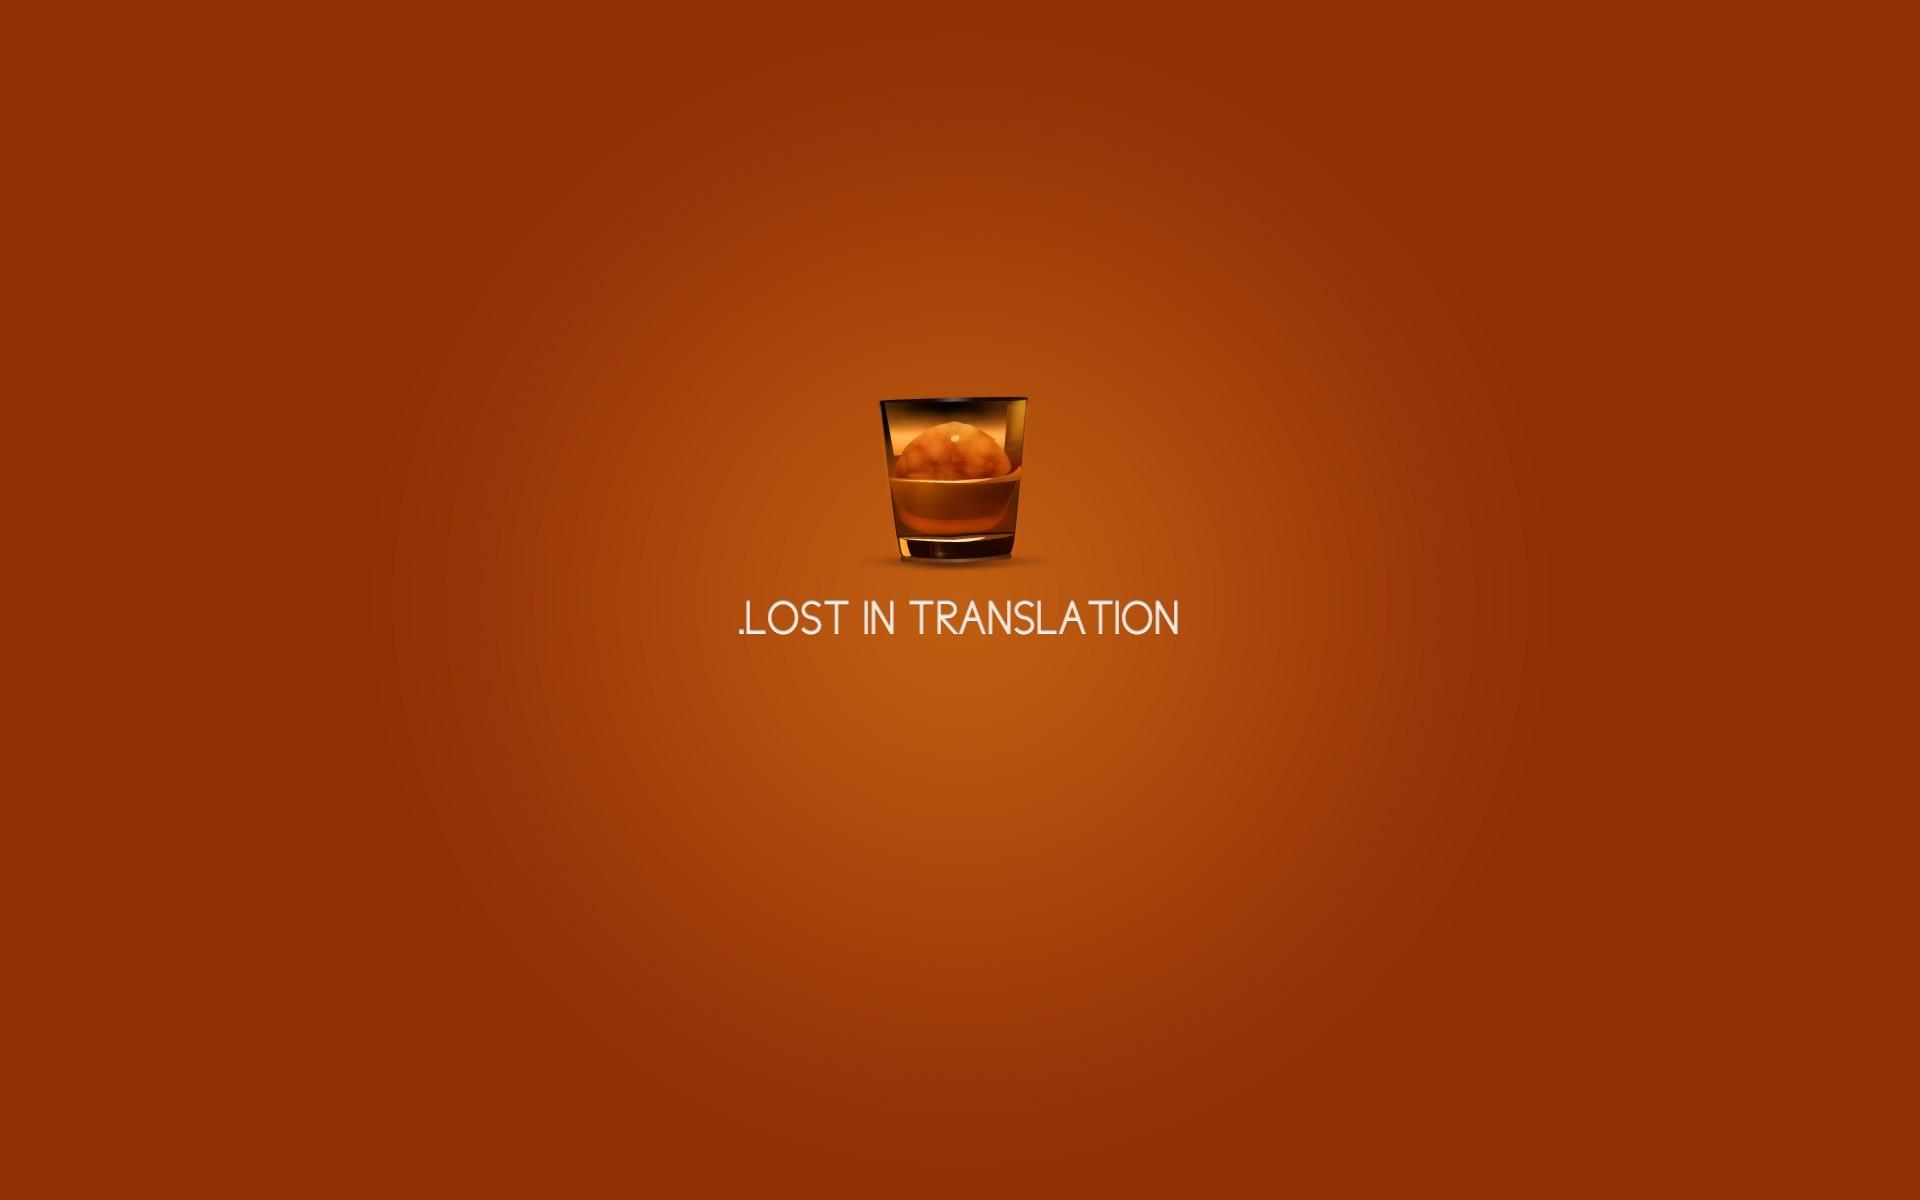 Download the Lost In Translation Wallpaper, Lost